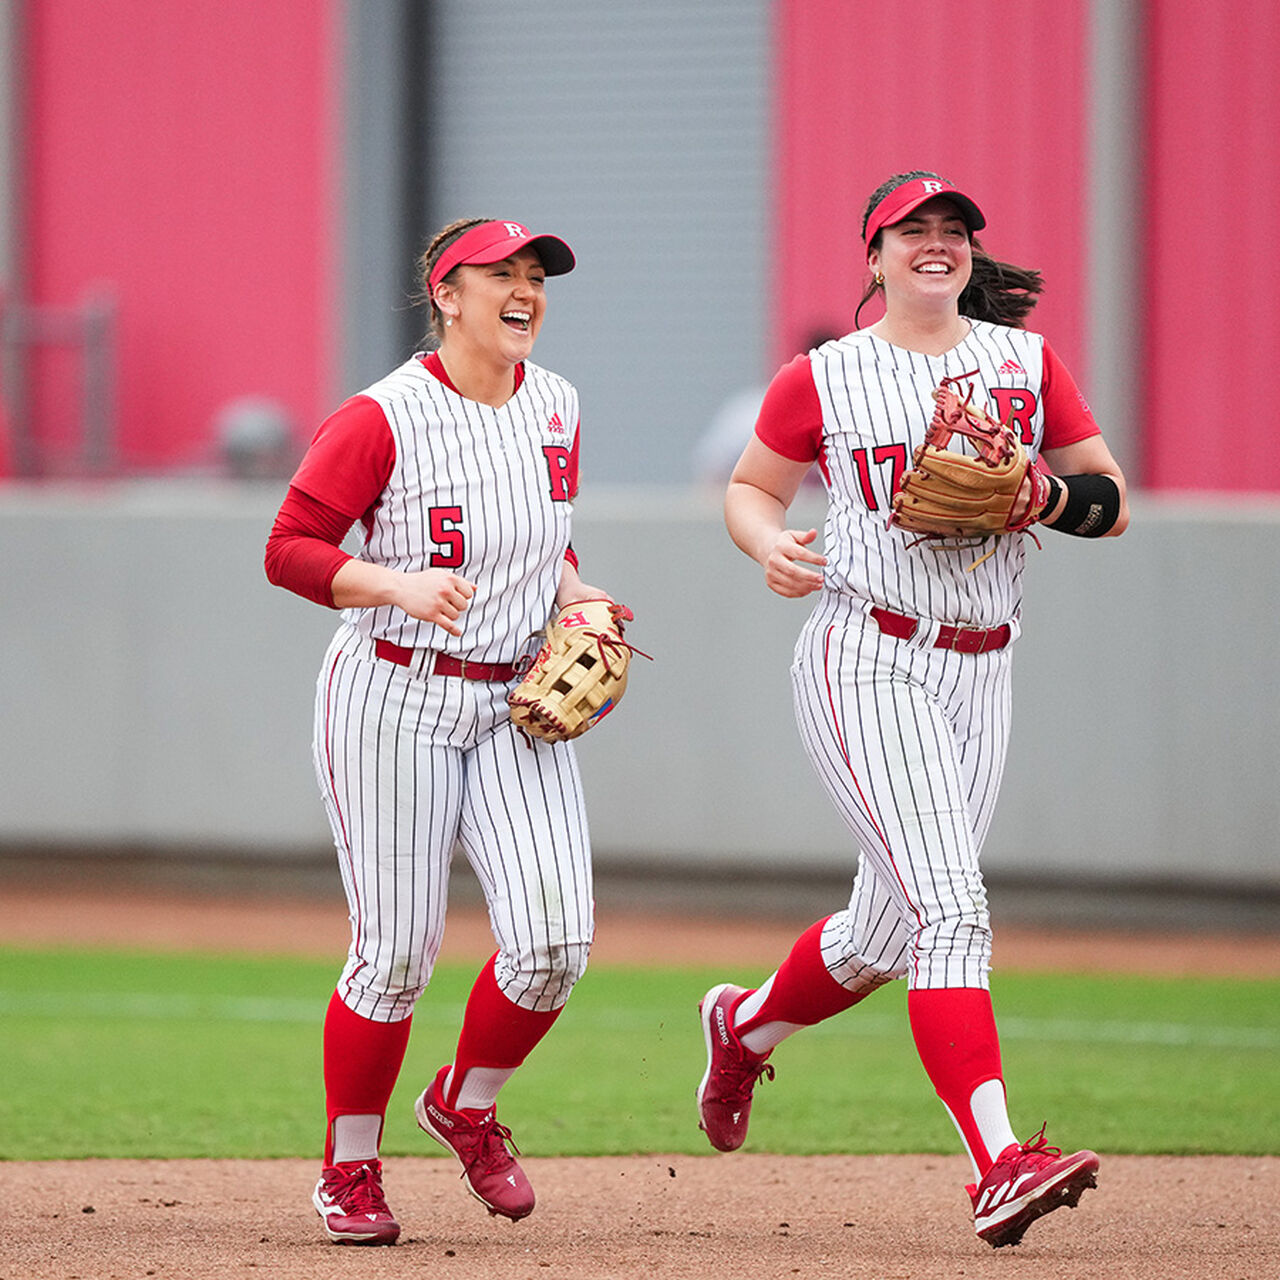 Two Rutgers Softball players image number 0